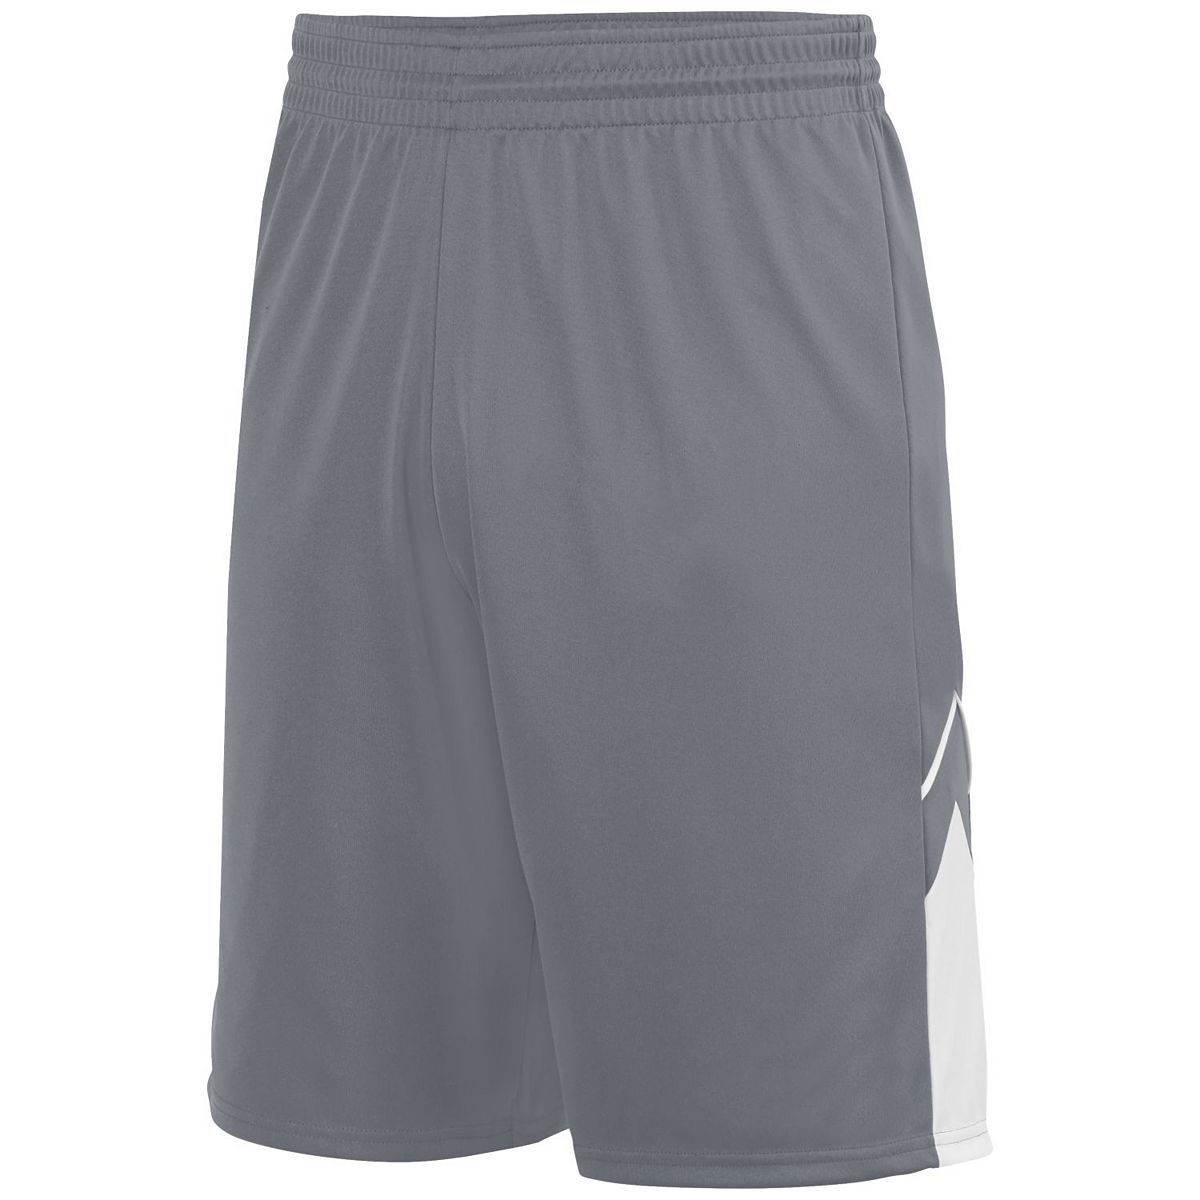 Augusta Sportswear Alley-Oop Reversible Shorts in Graphite/White  -Part of the Adult, Adult-Shorts, Augusta-Products, Basketball, All-Sports, All-Sports-1 product lines at KanaleyCreations.com